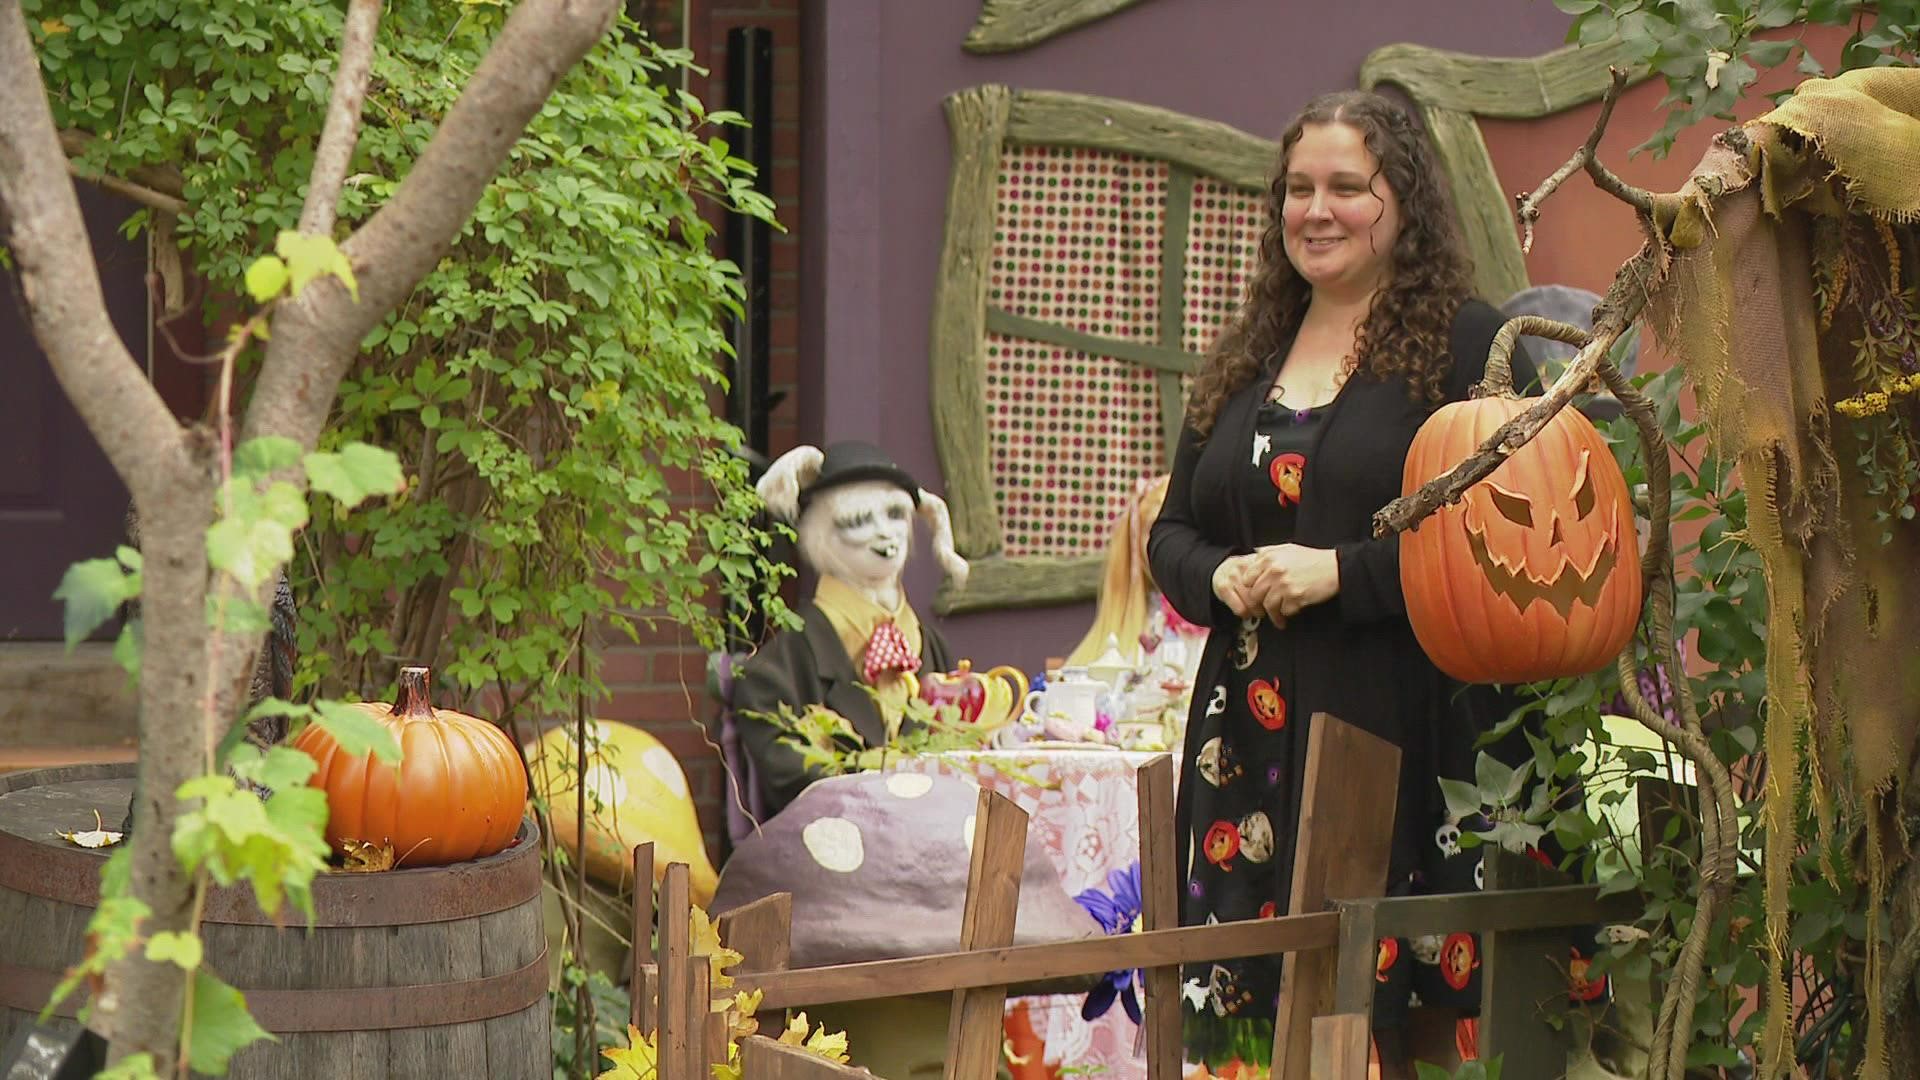 For the 13th year, the Comstock Park home's front yard has been transformed into Storybook Hollow. This year, it features an ArtPrize top five winner.